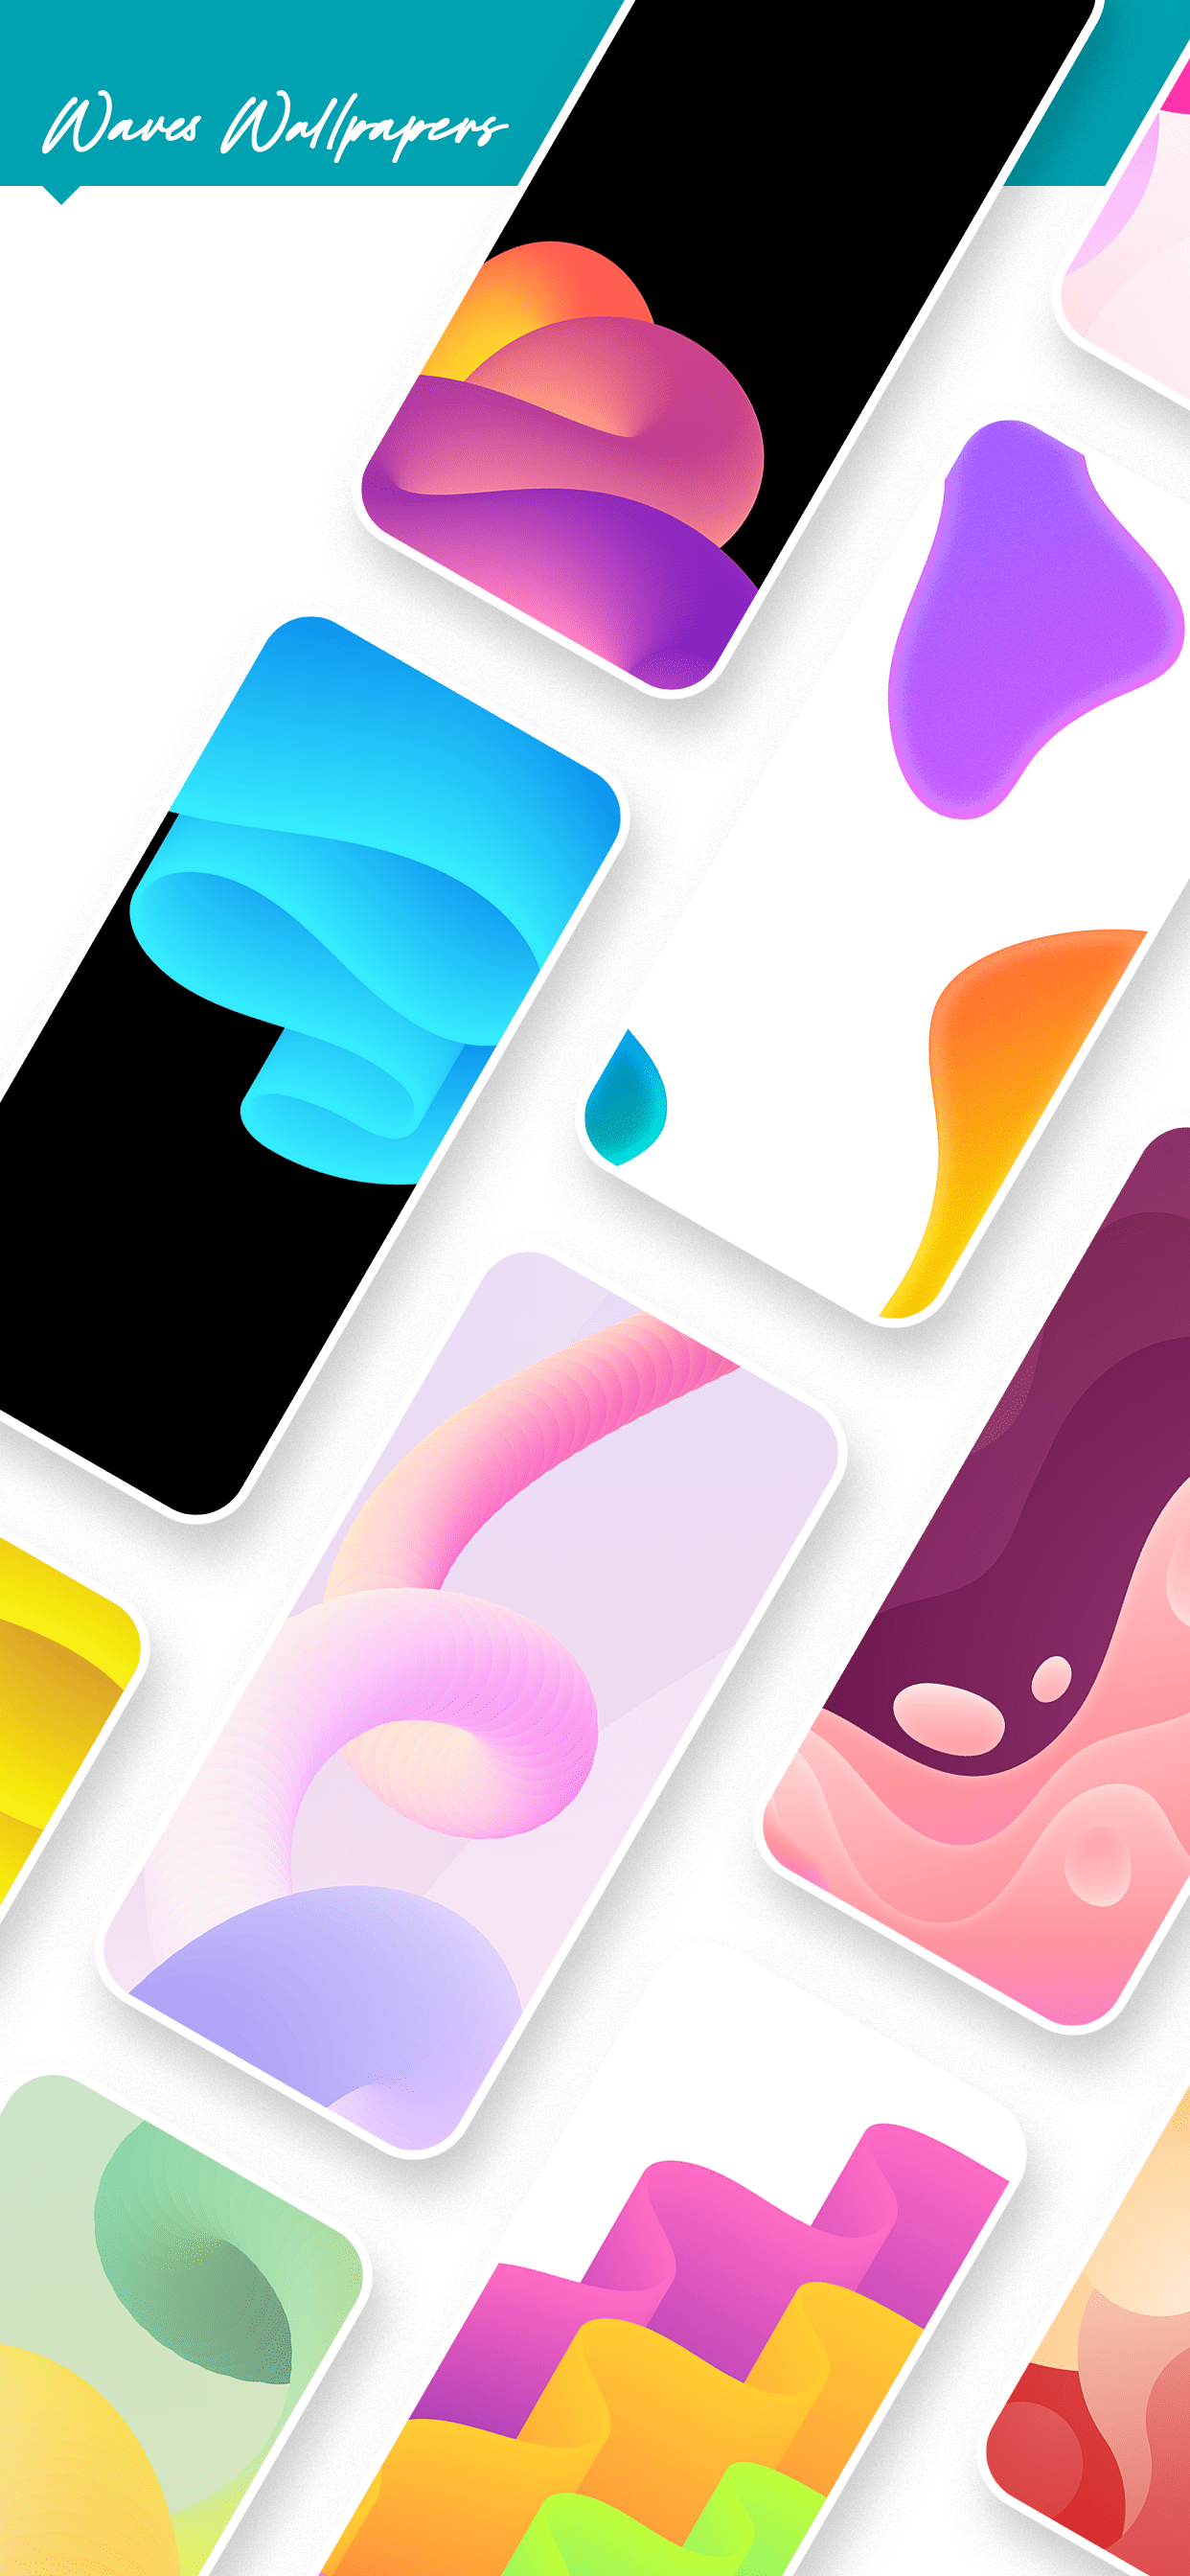 Waves-Wallpapers-1.png